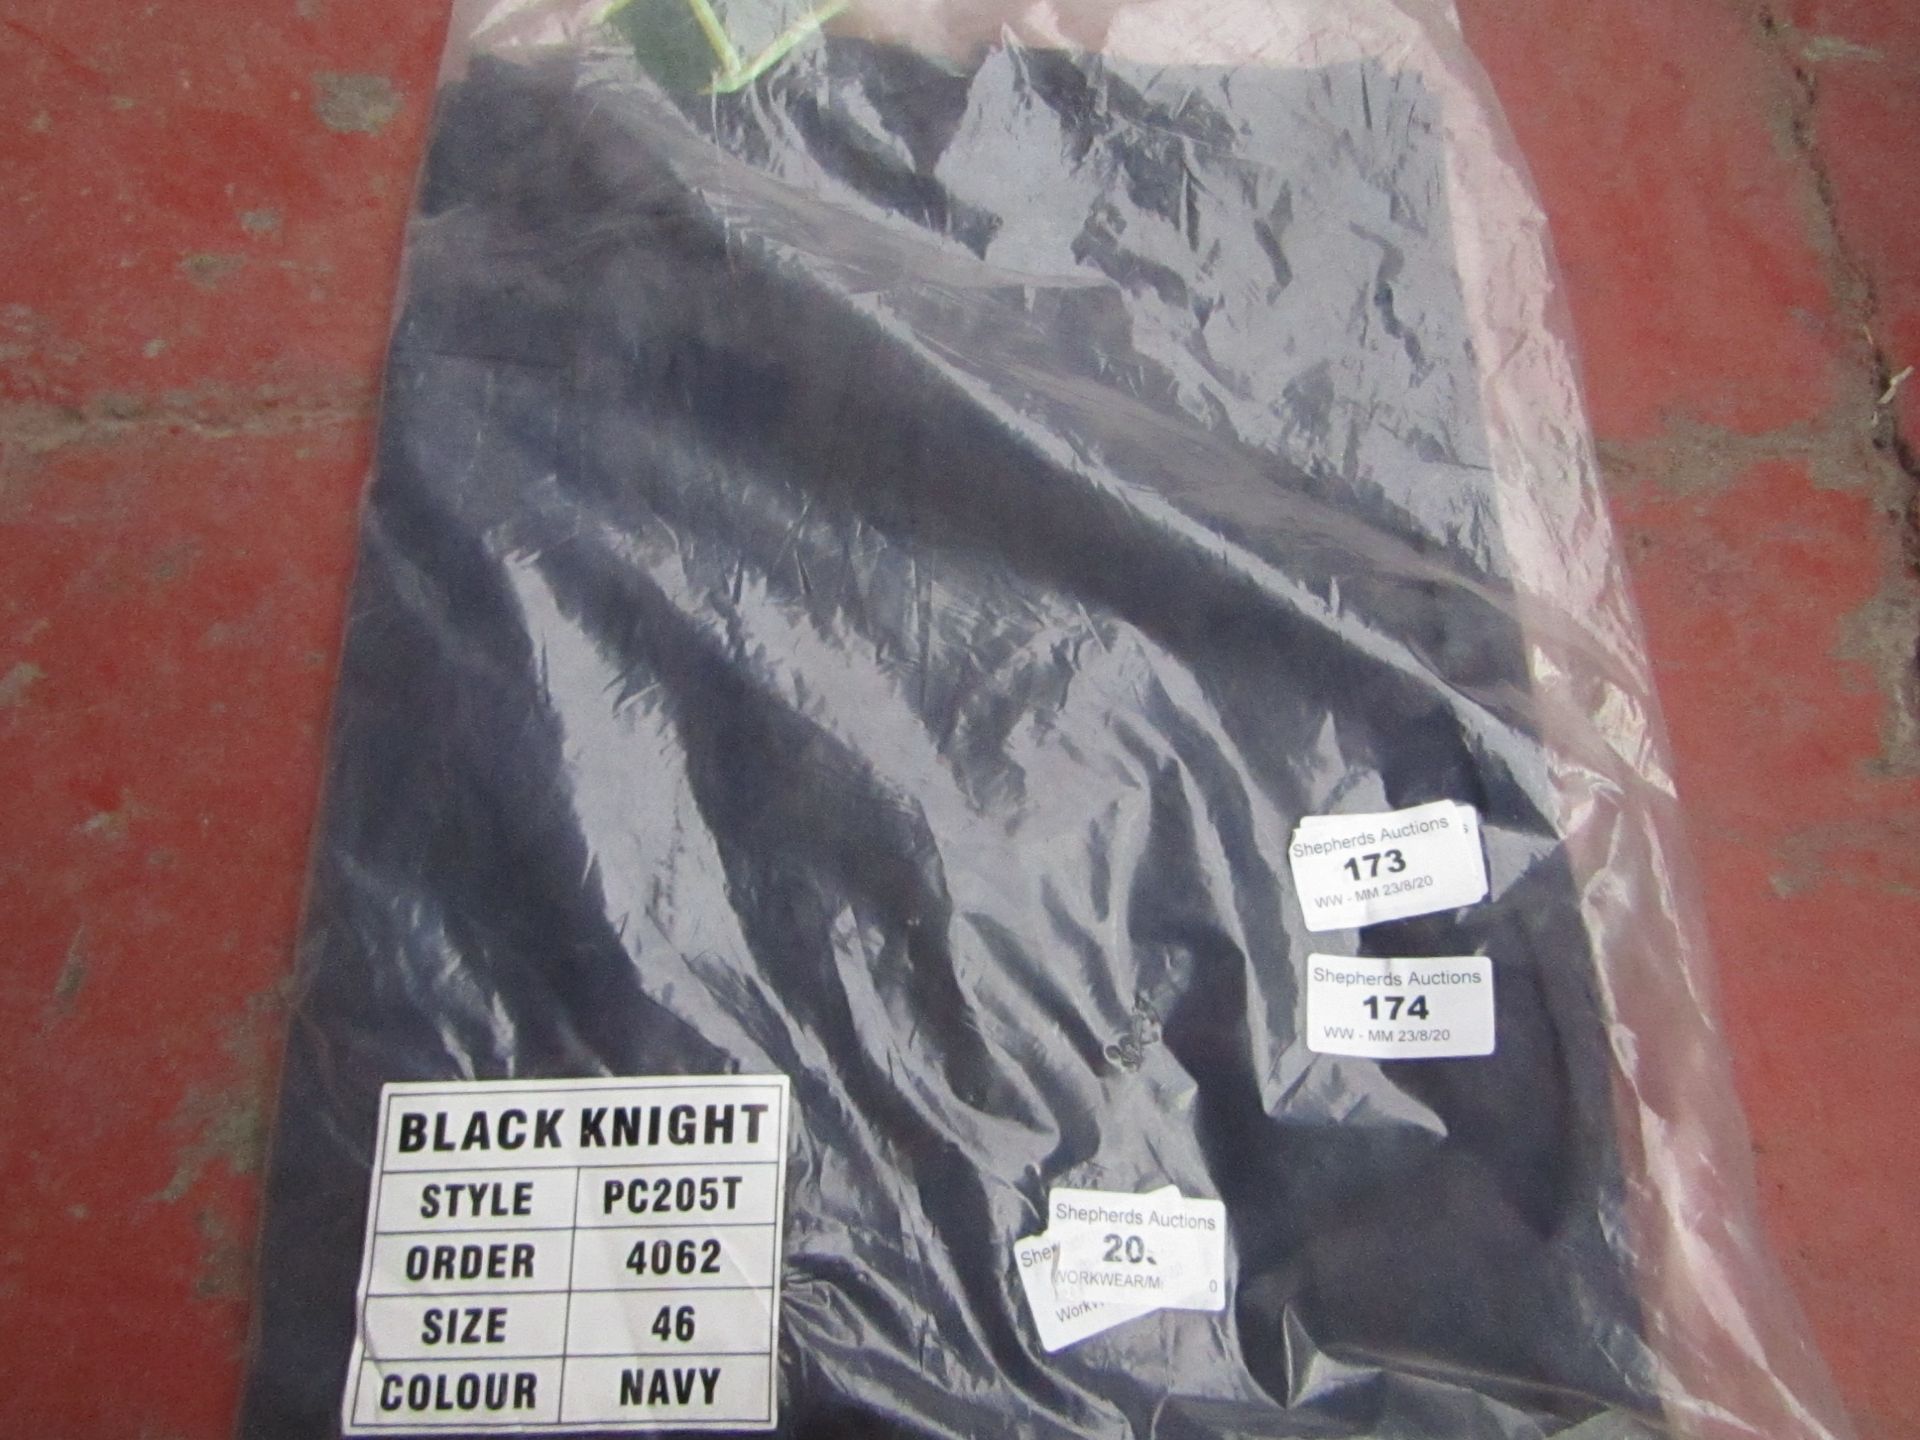 2x Black Knight - Boiler Suit - Size 38R - Packaged.